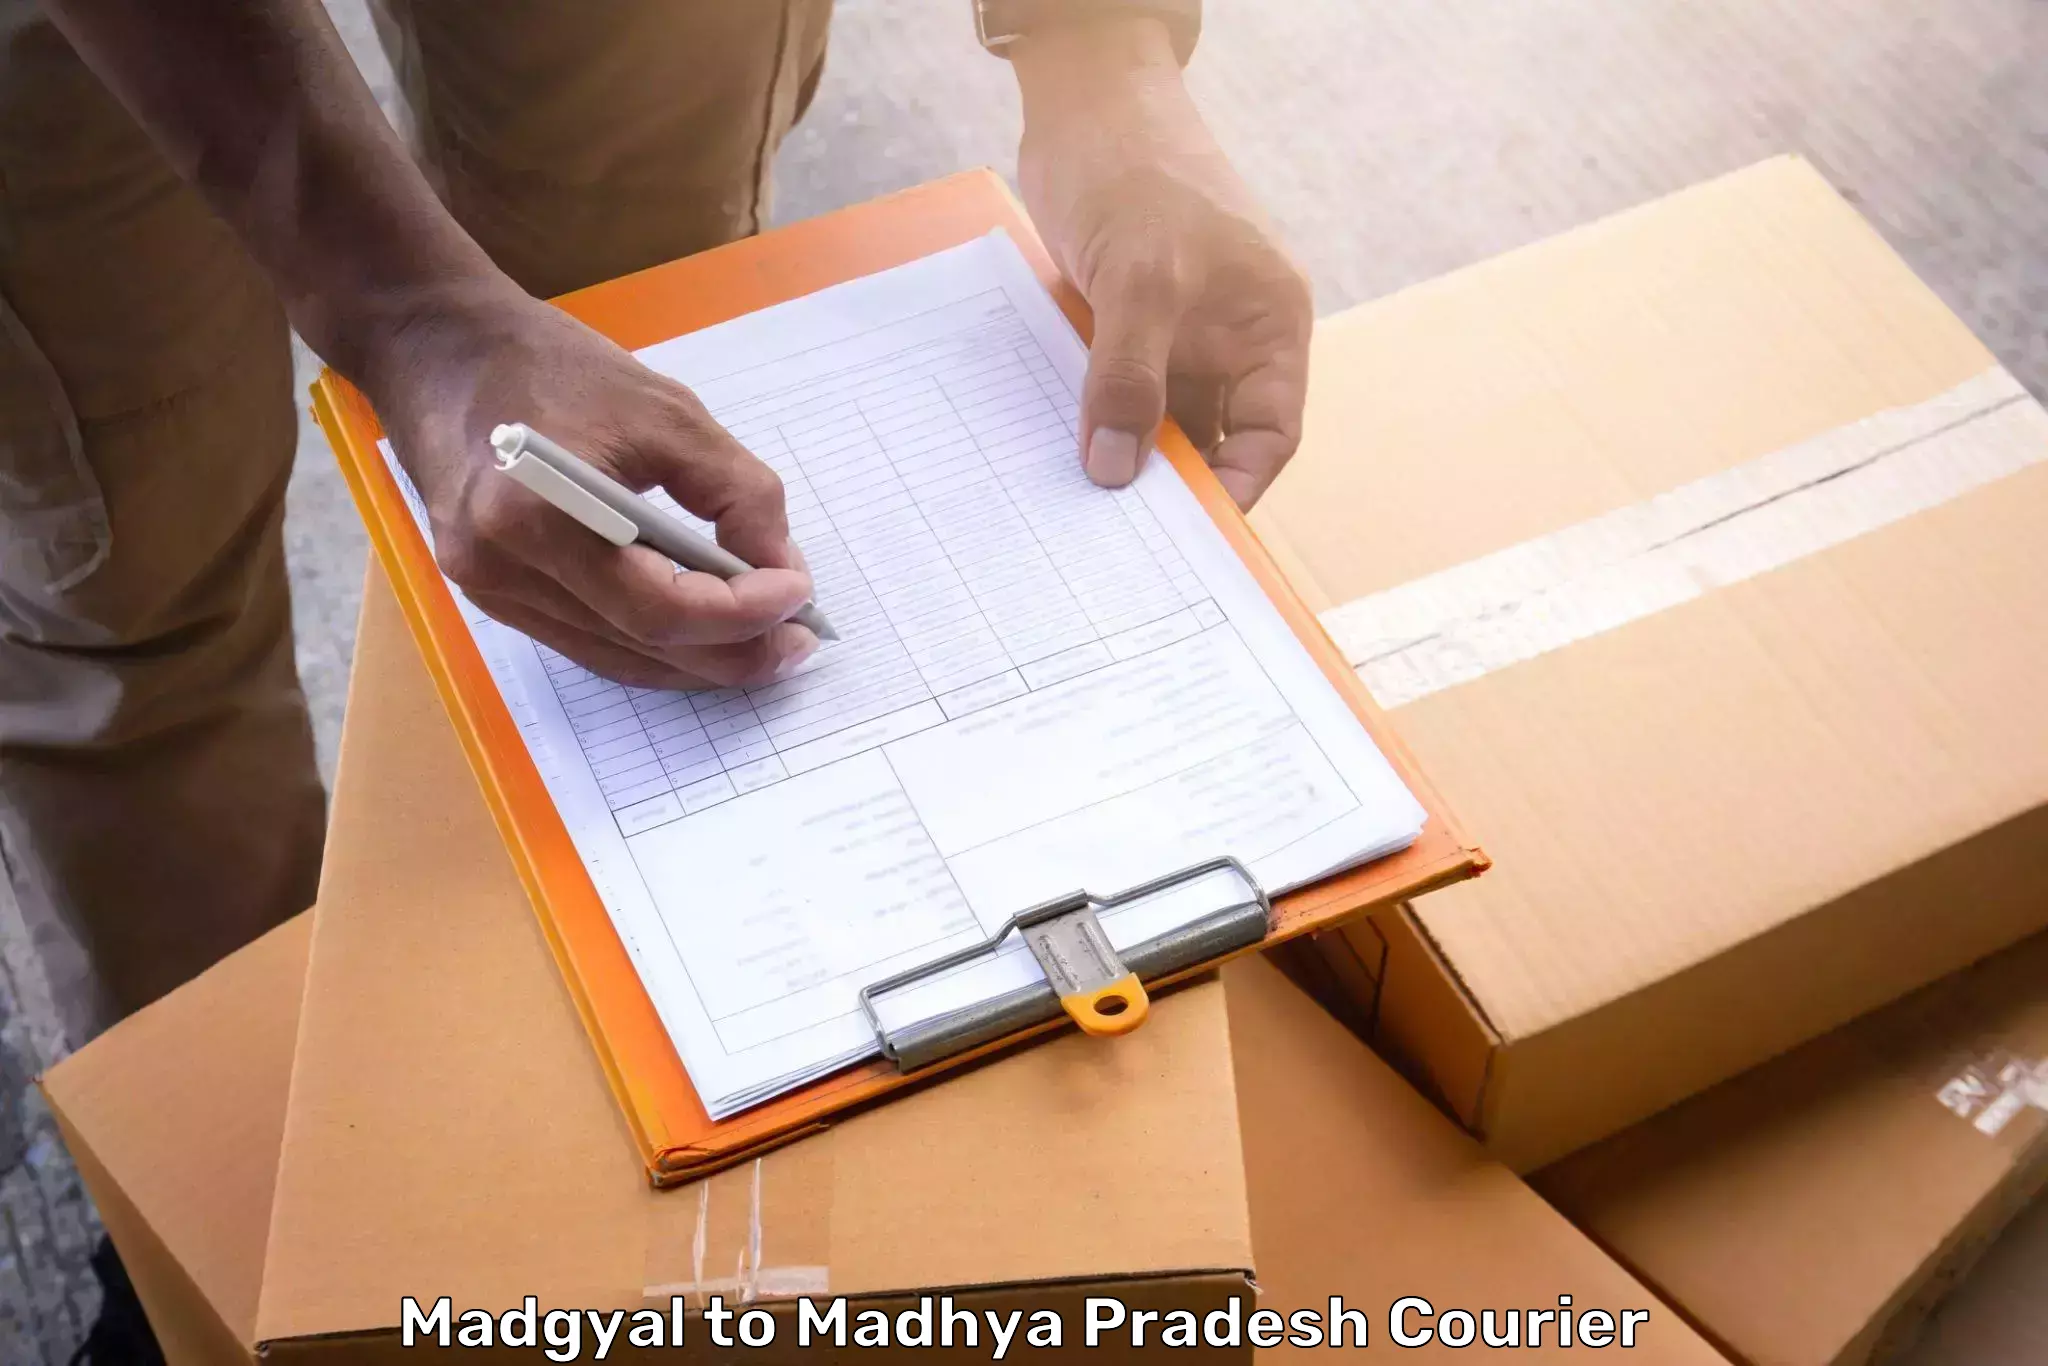 Same day luggage service Madgyal to IIT Indore